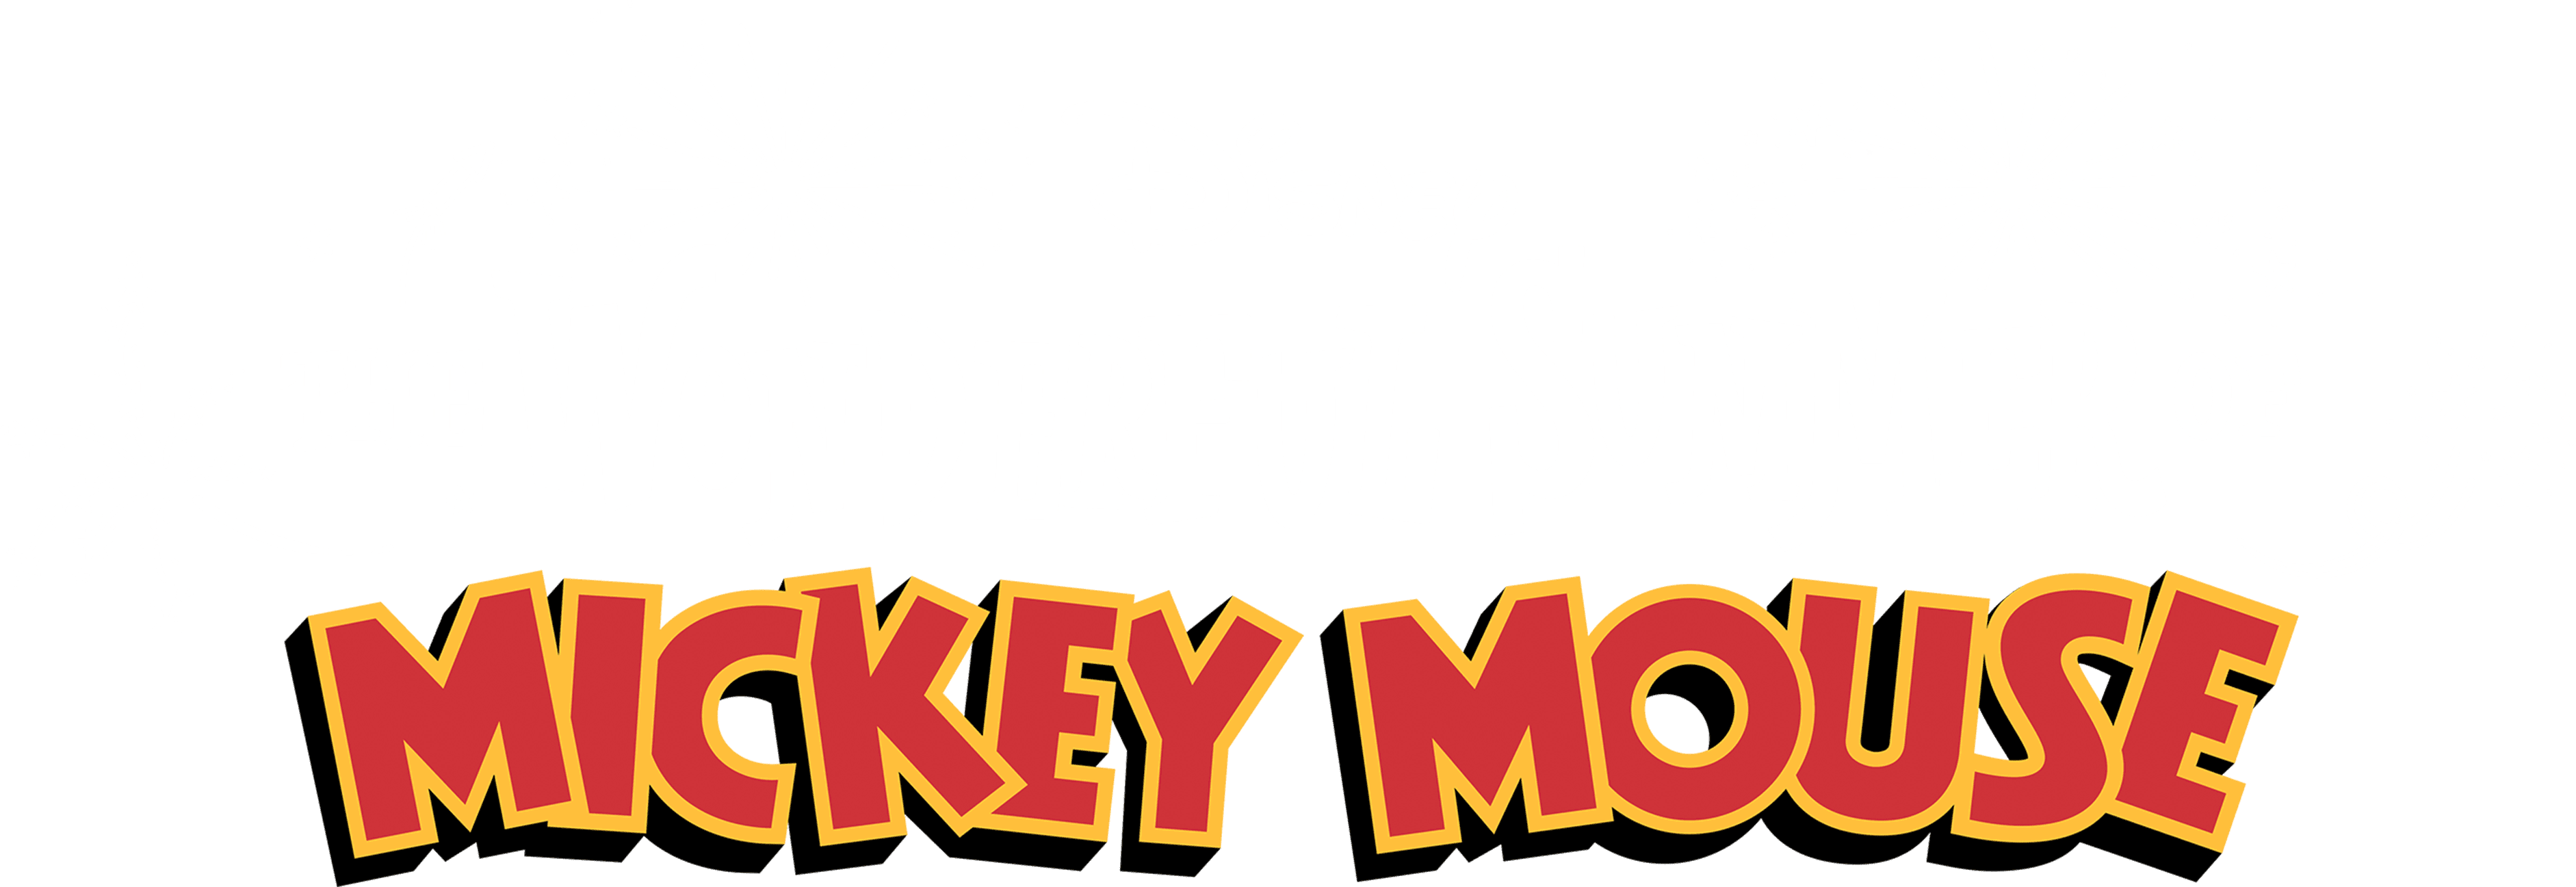 The Wonderful Summer of Mickey Mouse logo